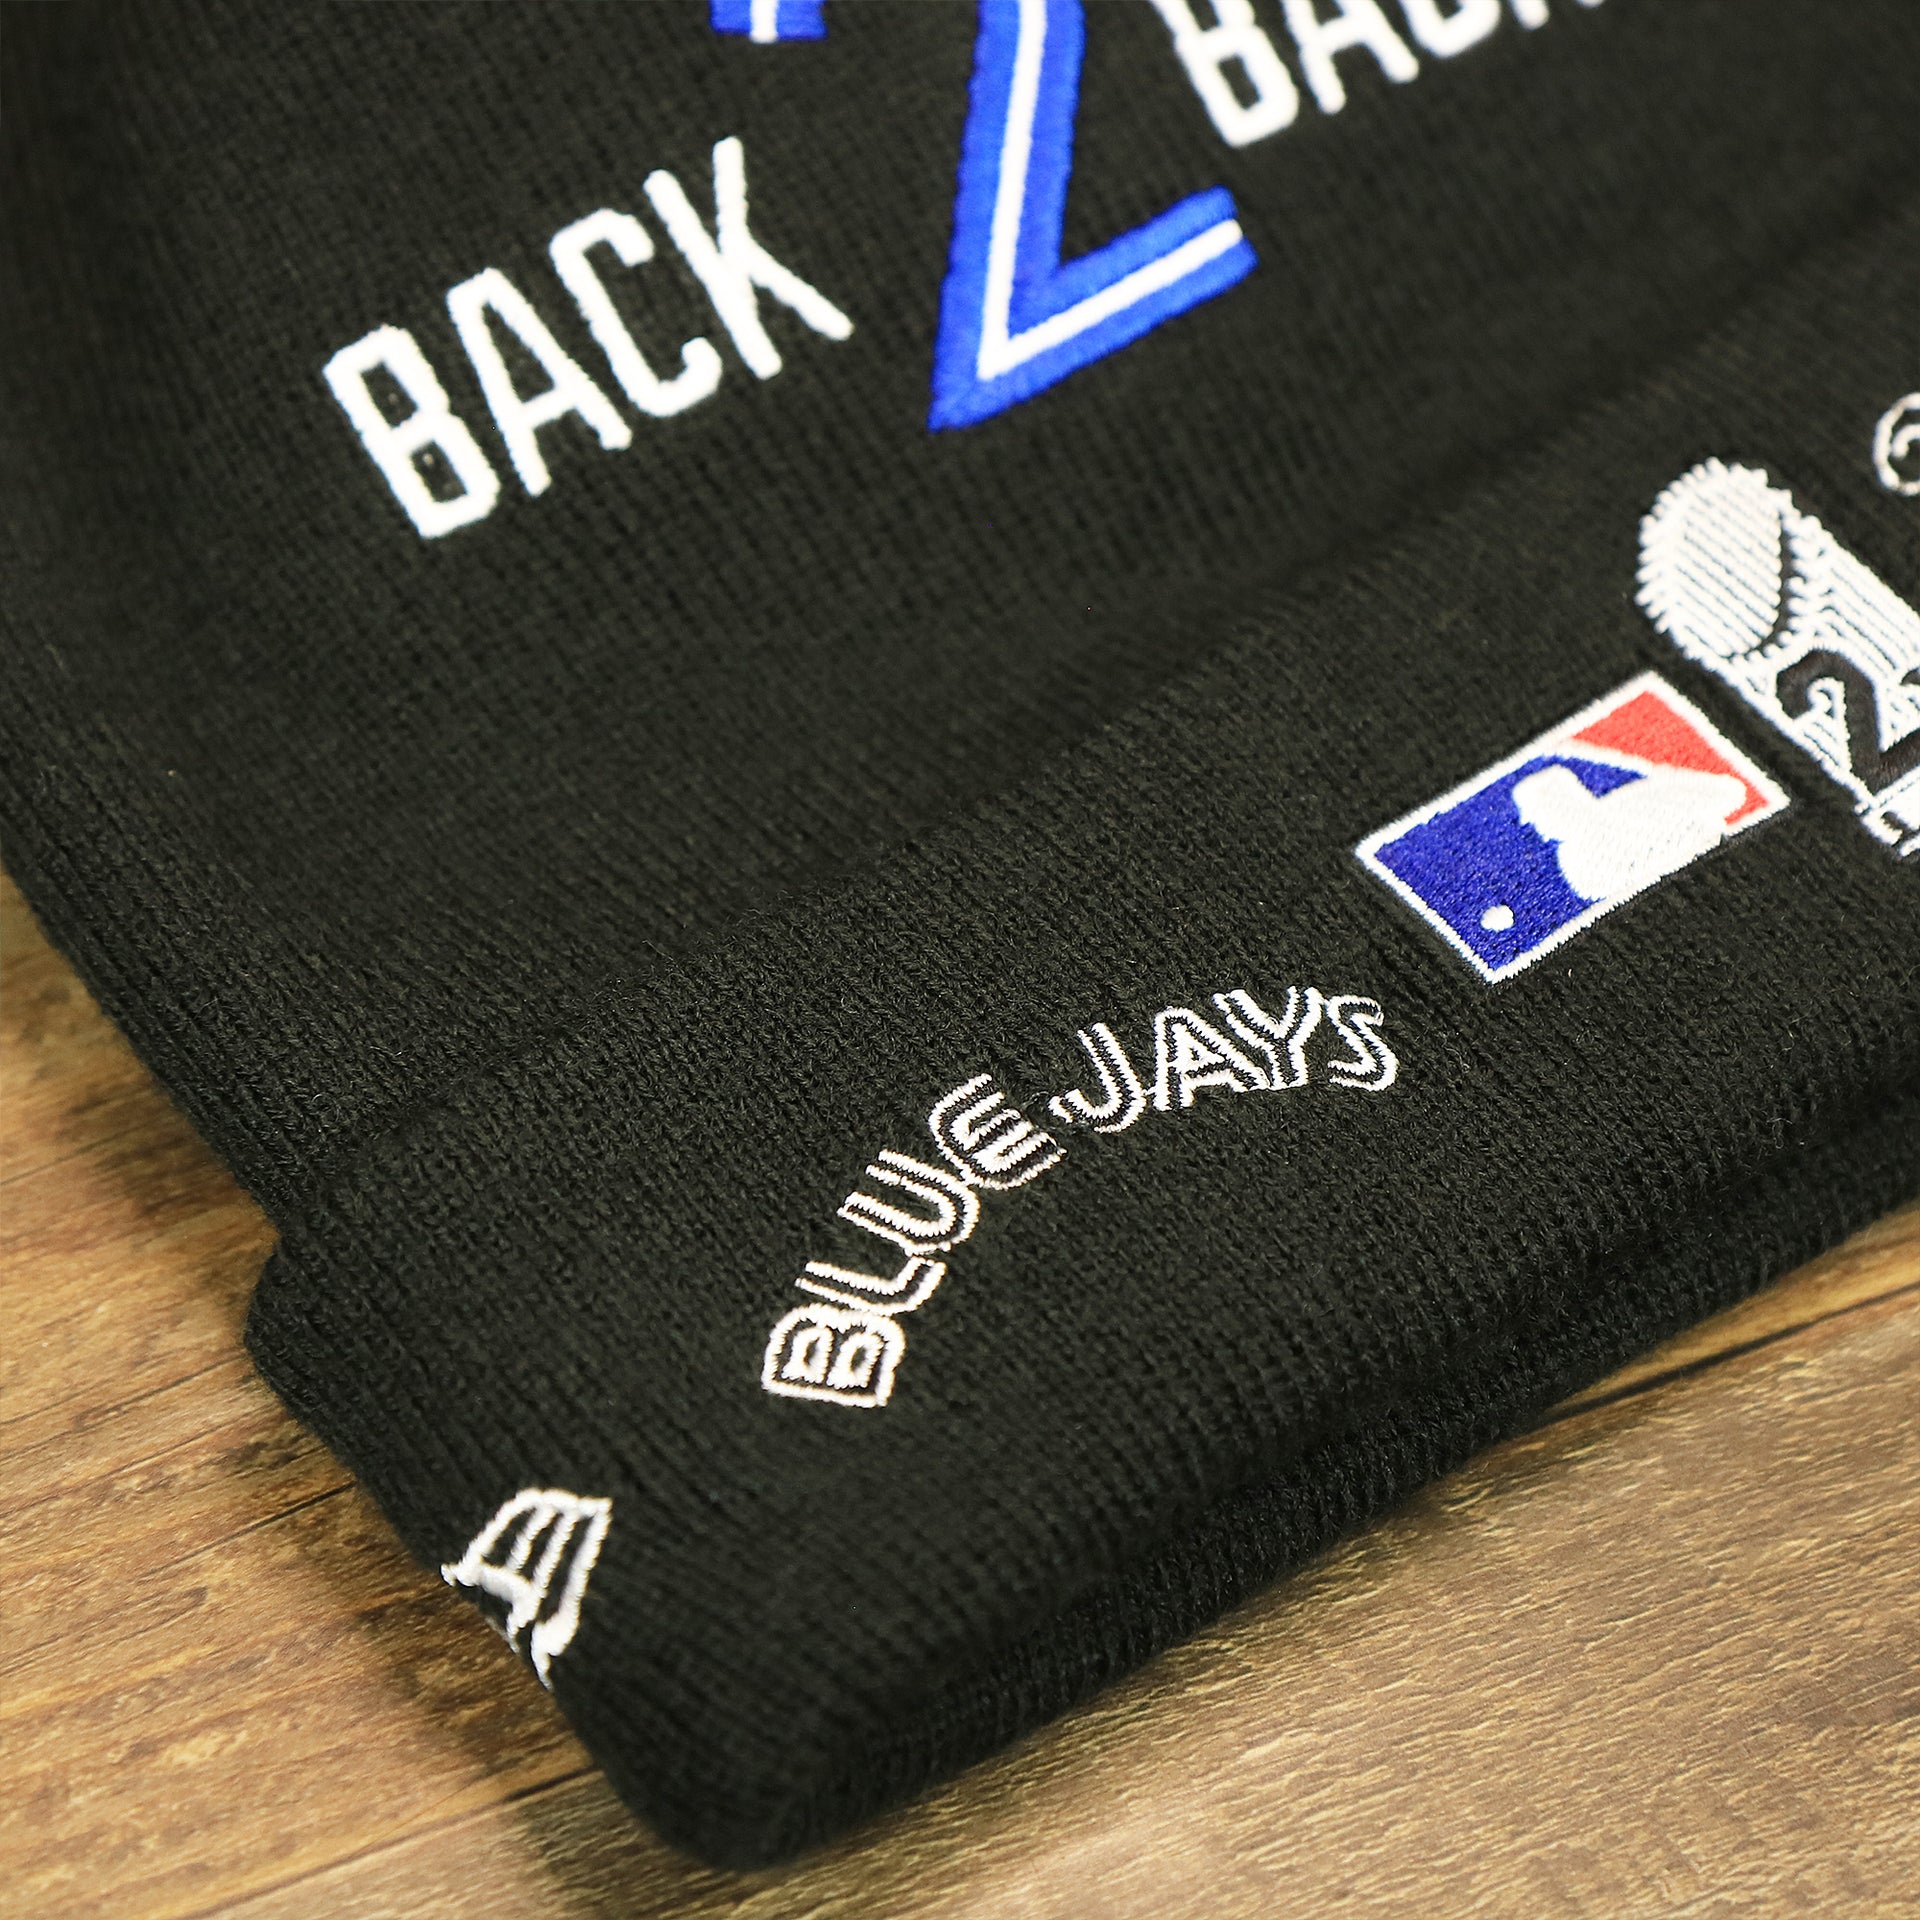 The Blue Jays Wordmark on the Toronto Blue Jays All Over World Series Side Patch 2x Champion Knit Cuff Beanie | New Era, Black